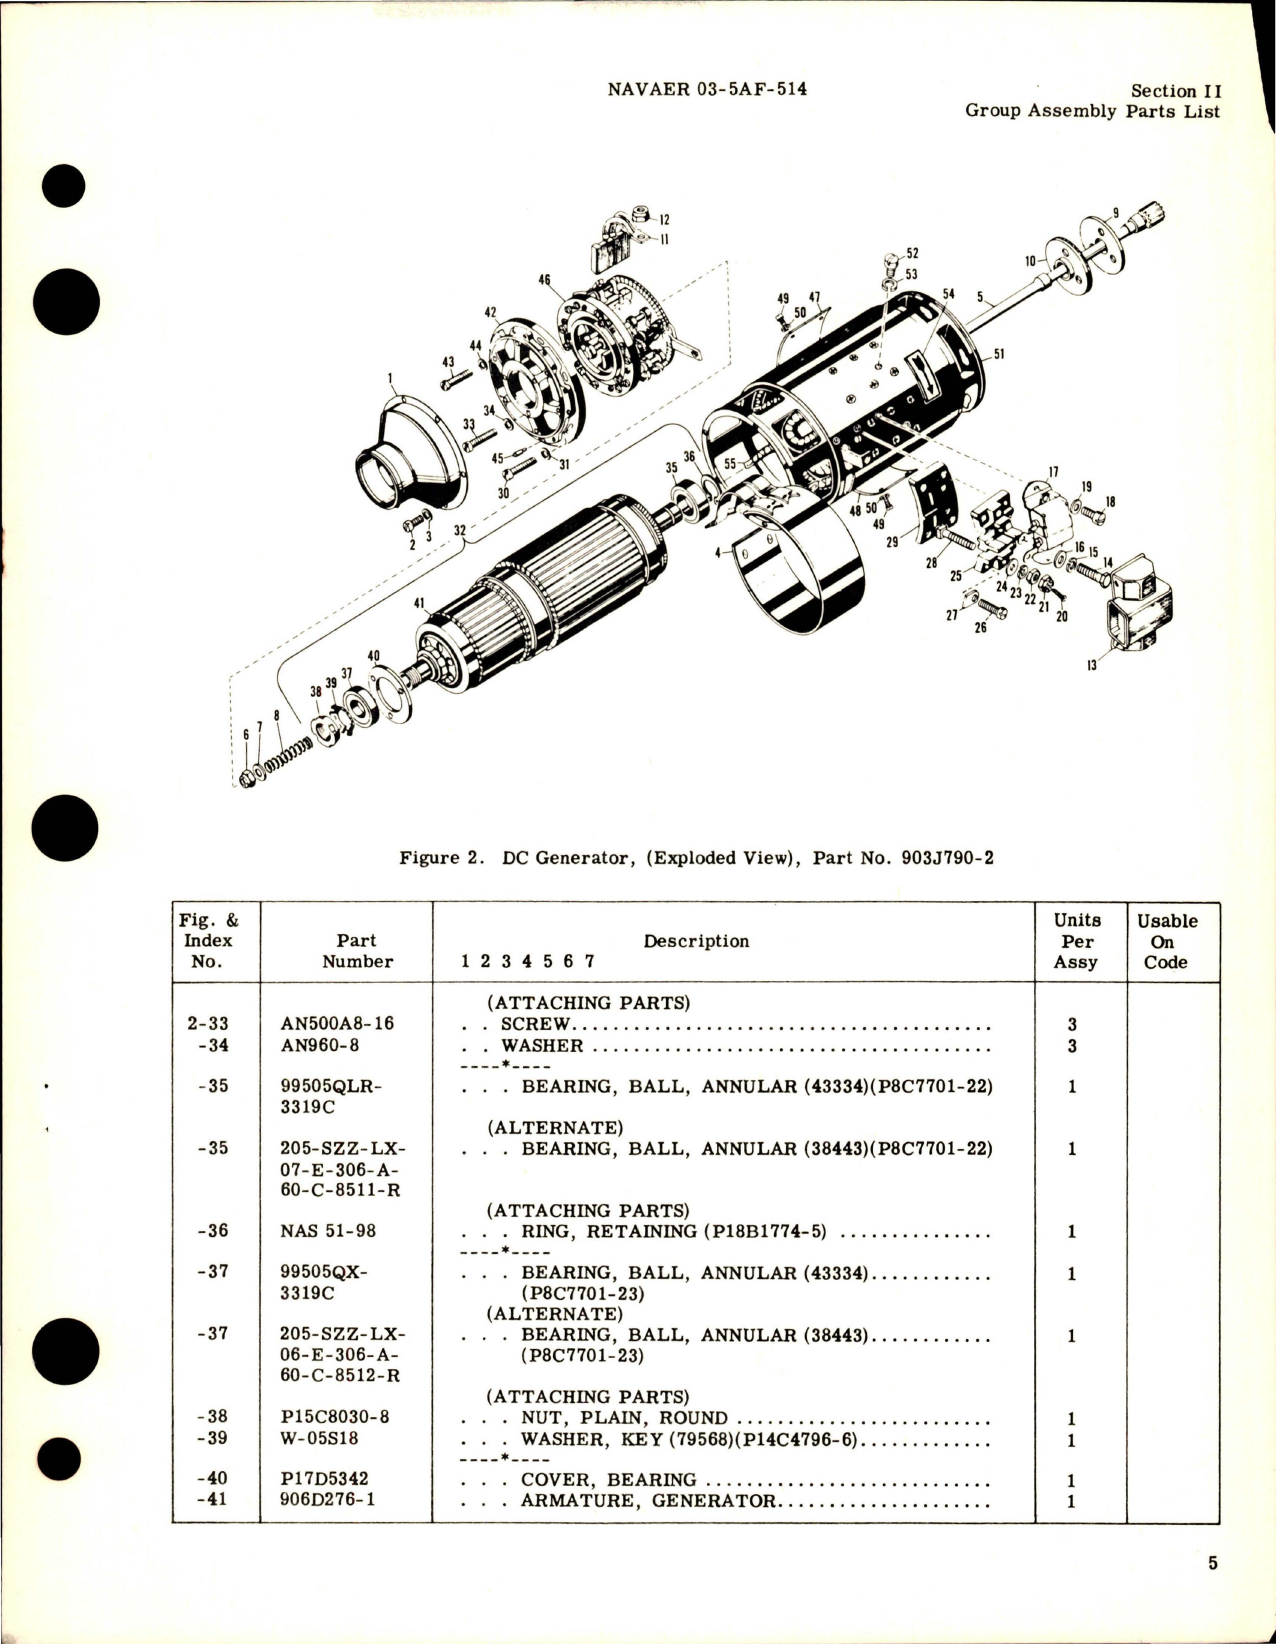 Sample page 7 from AirCorps Library document: Illustrated Parts Breakdown for DC Generator - Part 903J790-2